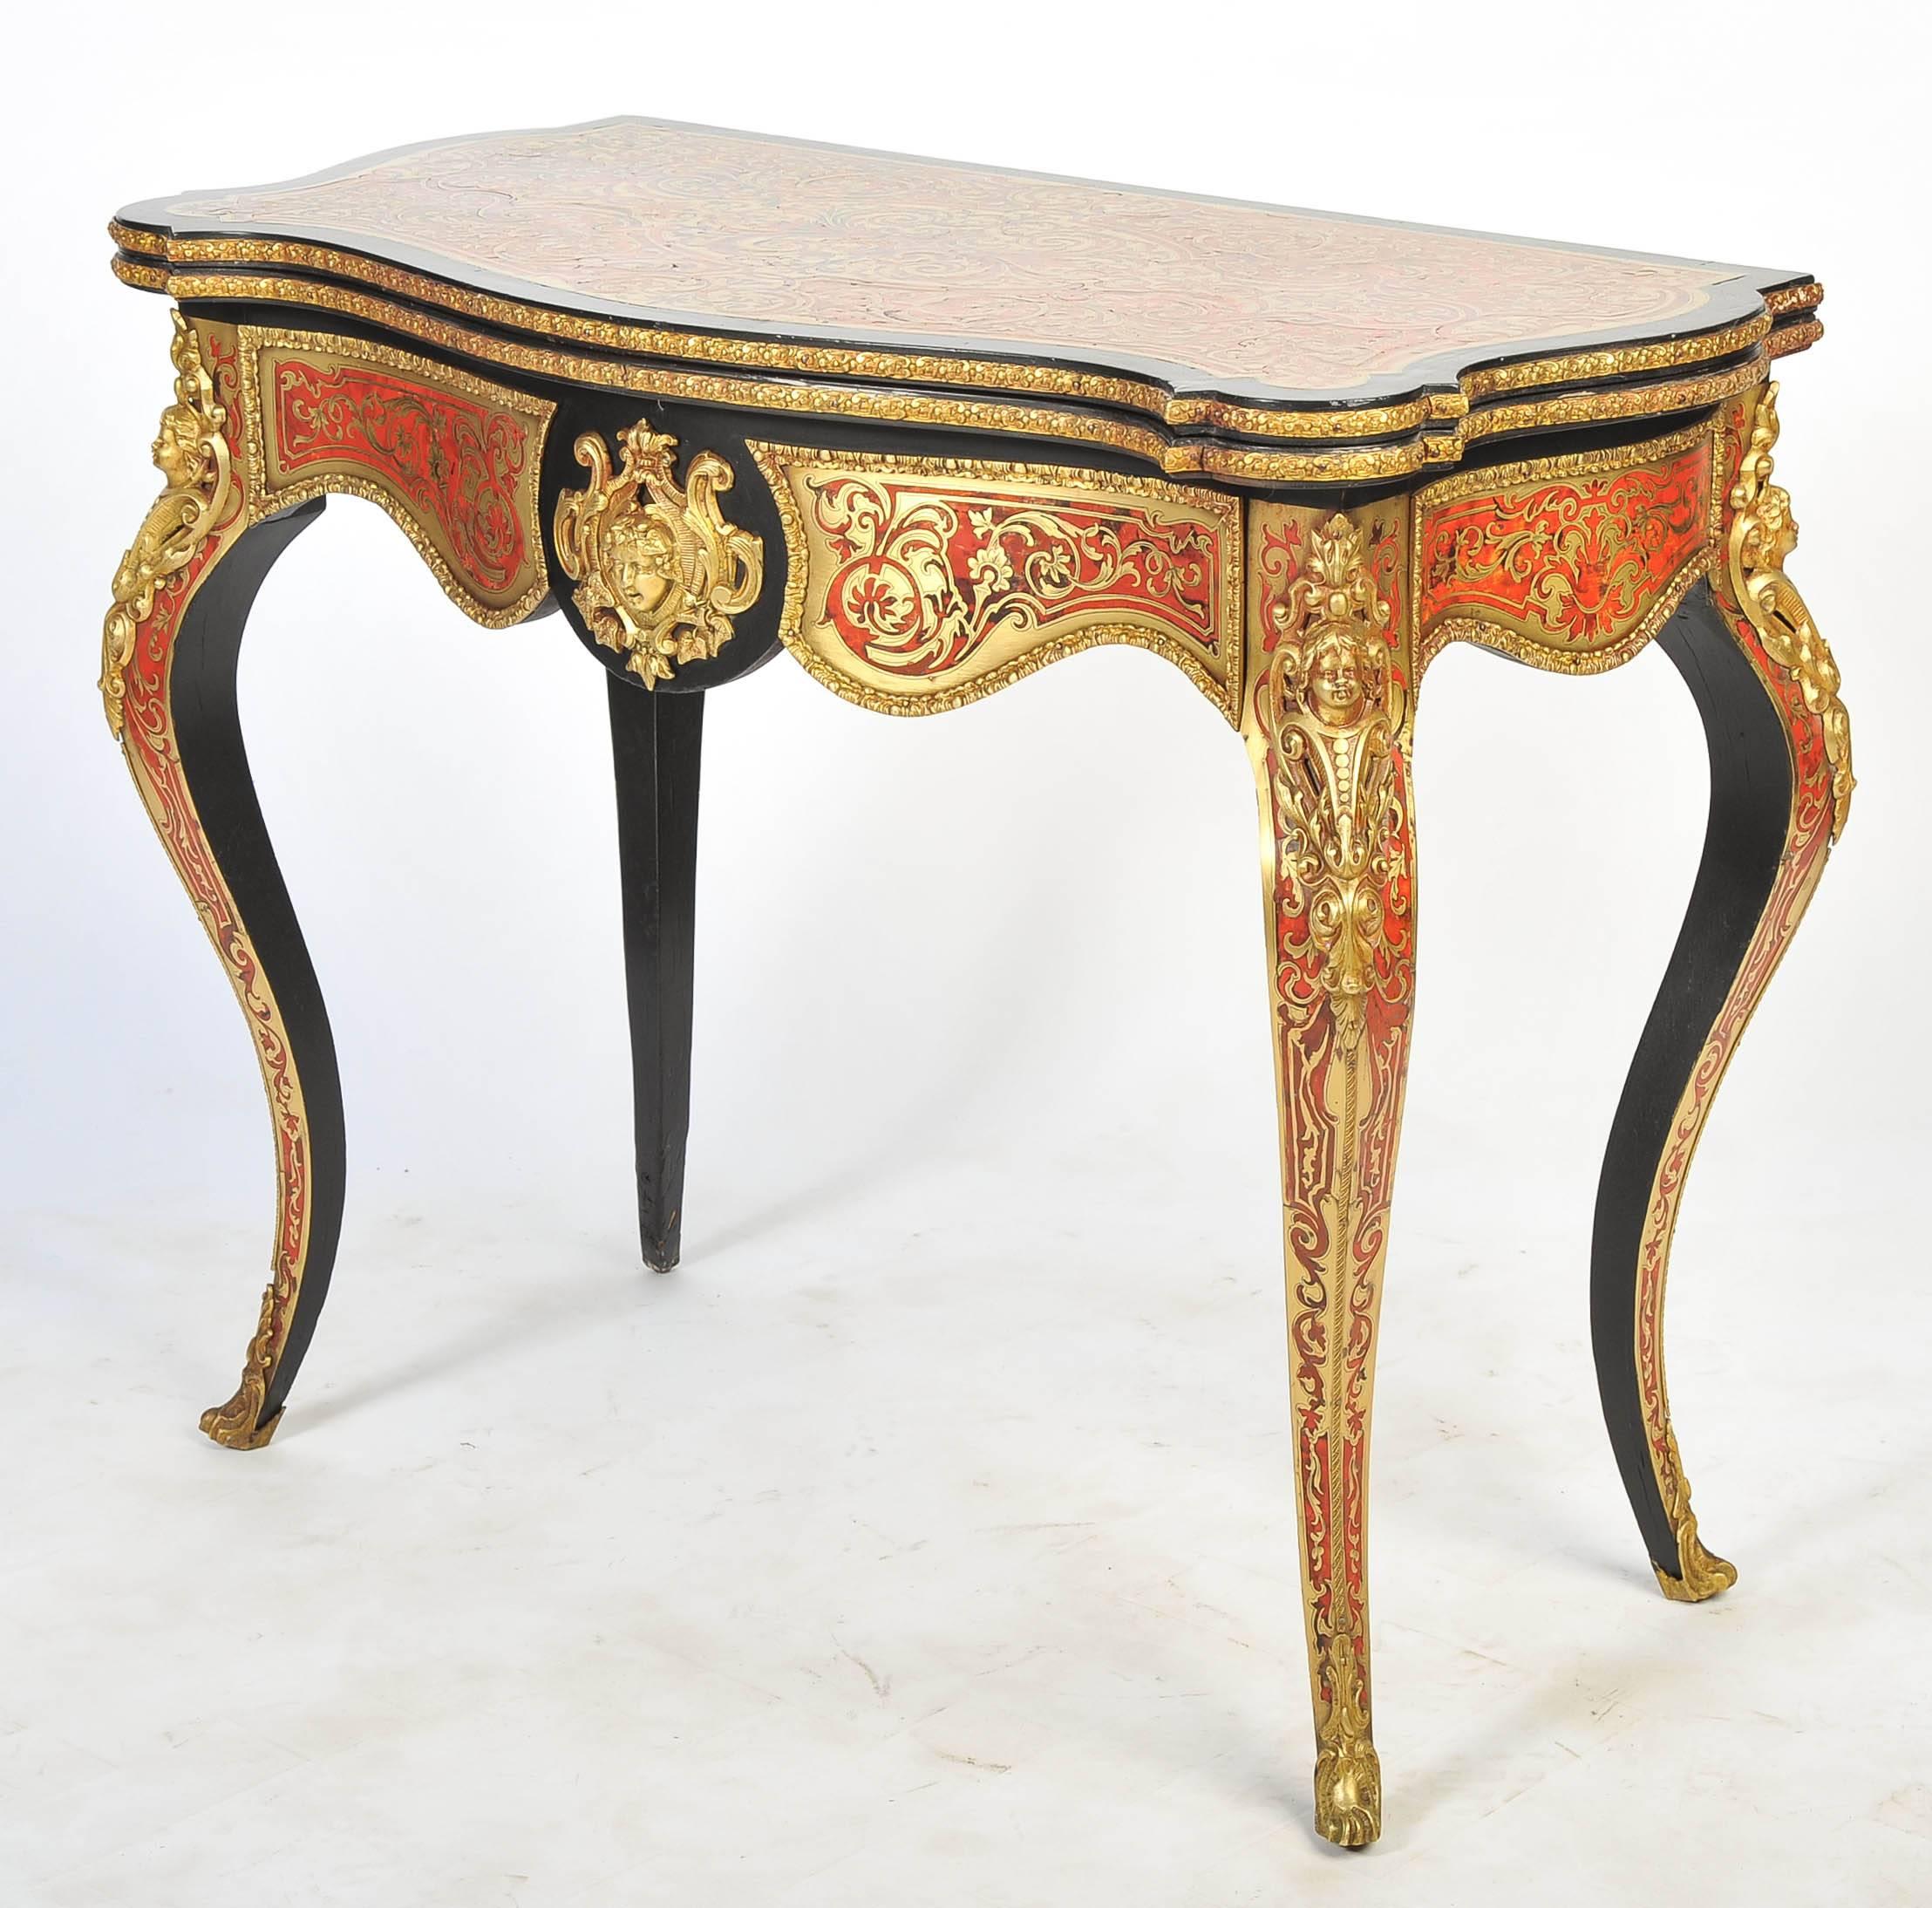 A good quality French 19th century tortoiseshell and brass inlaid card table.